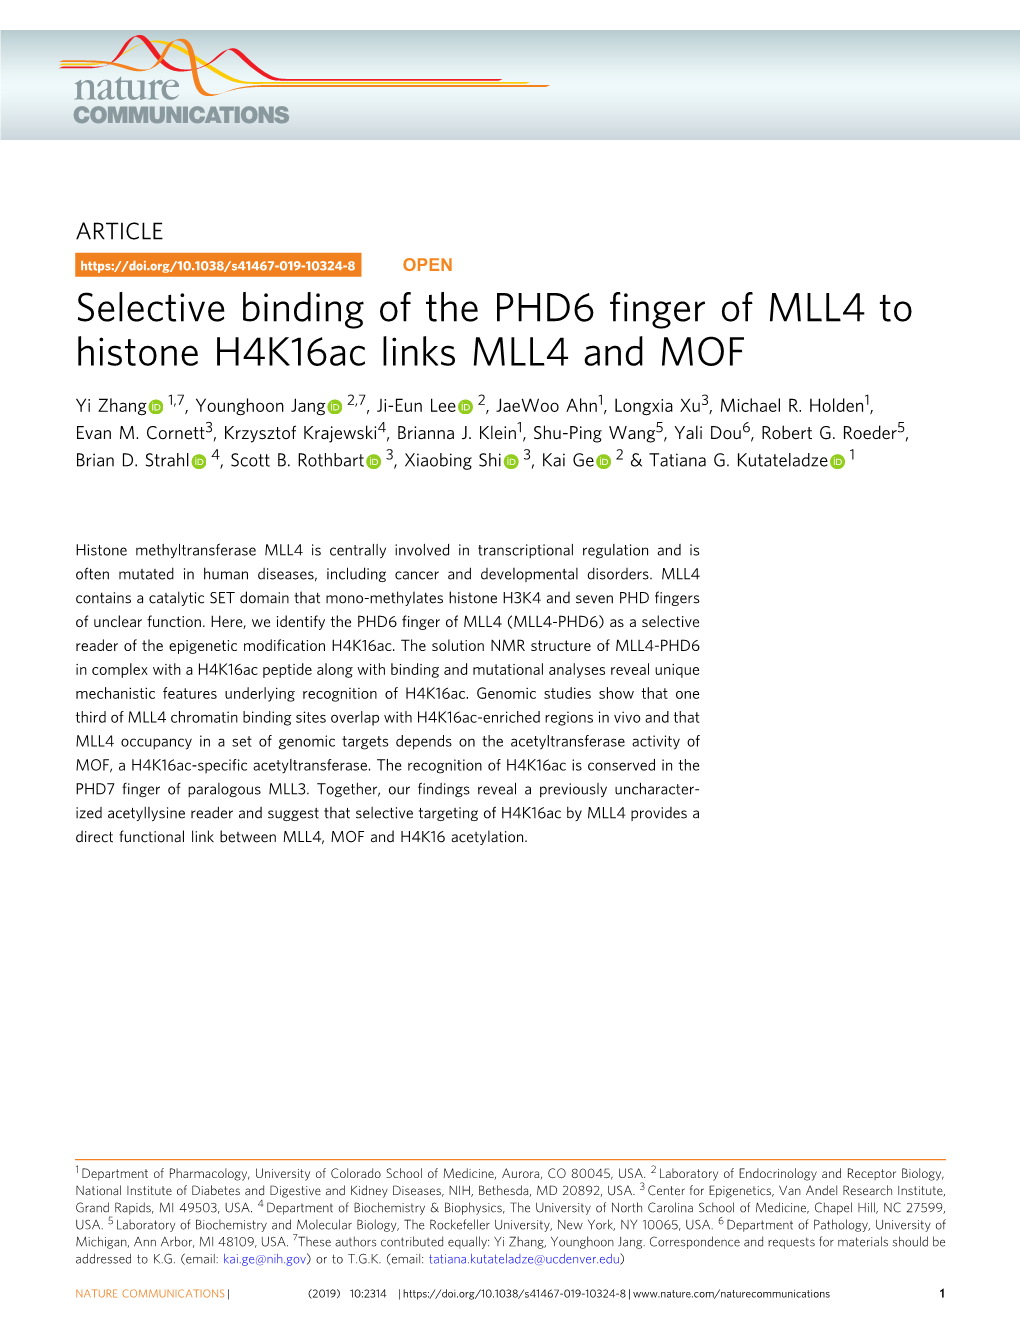 Selective Binding of the PHD6 Finger of MLL4 to Histone H4k16ac Links